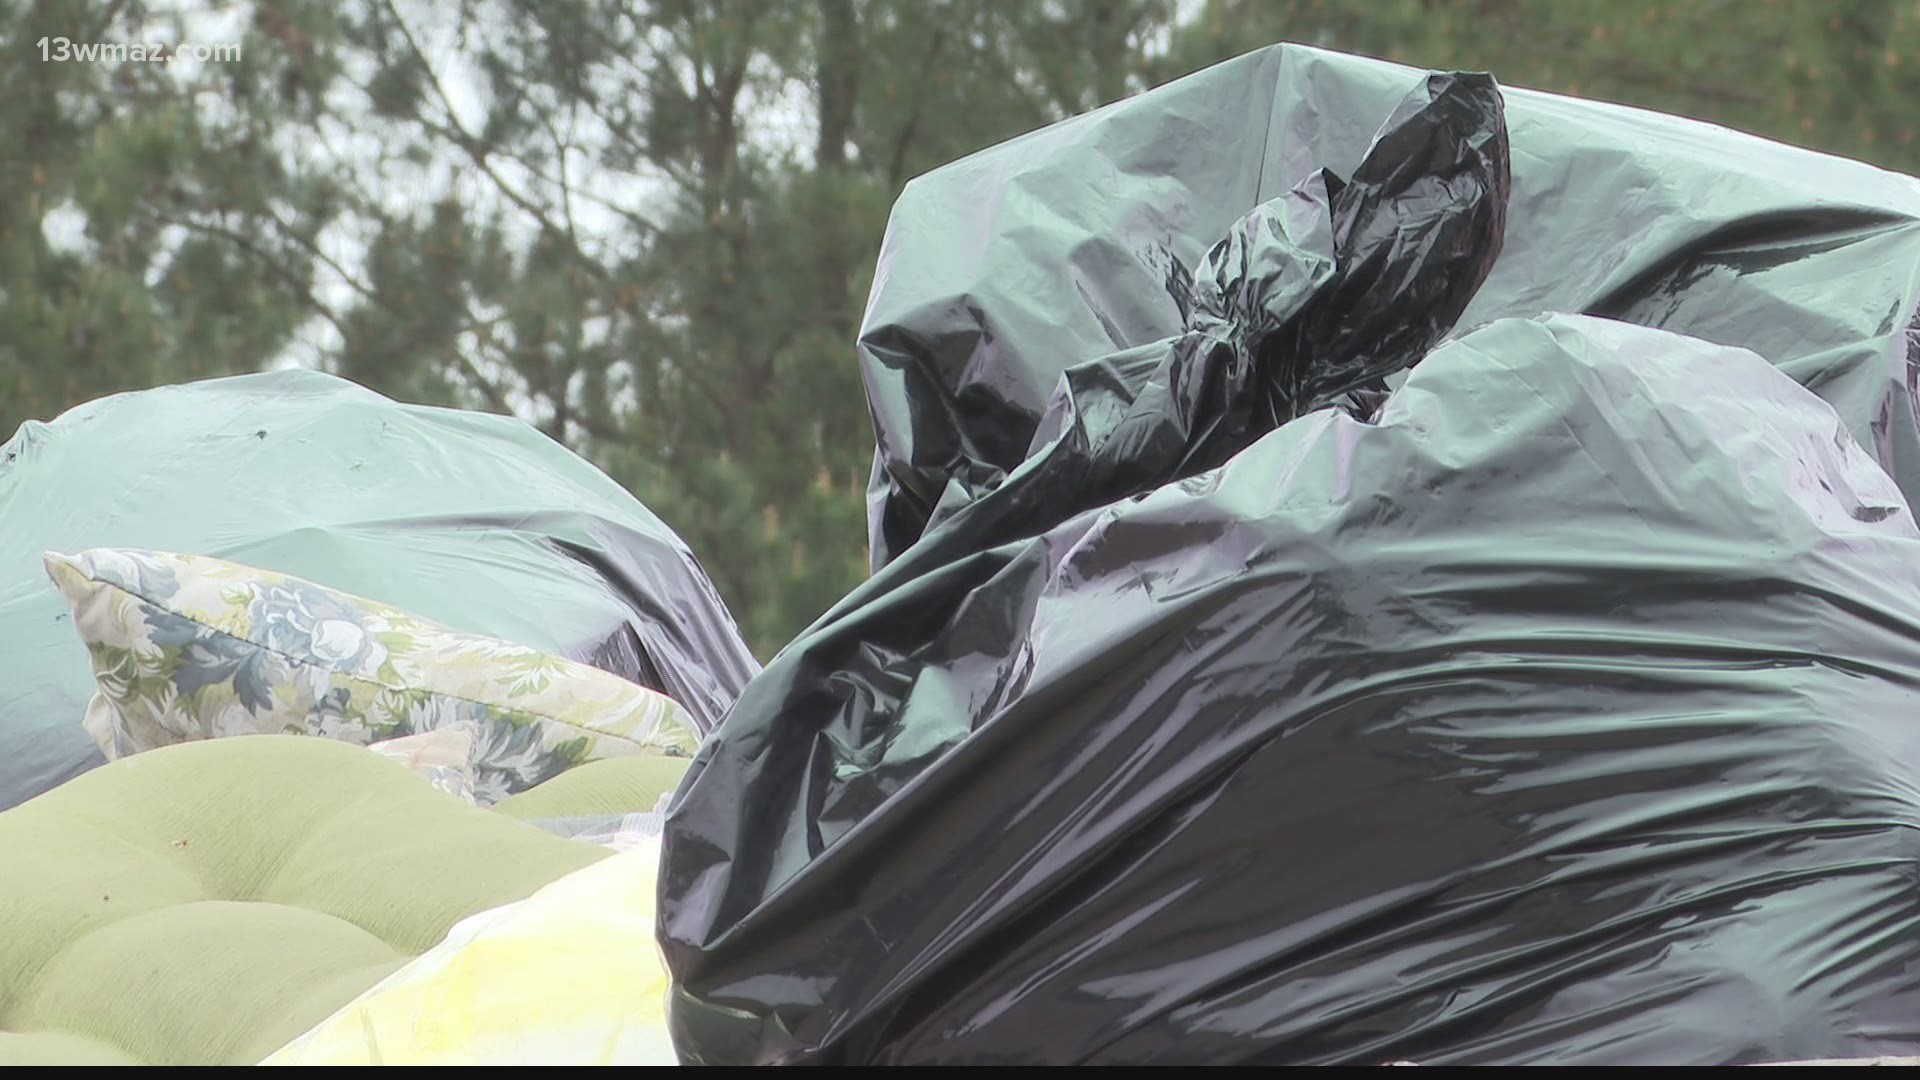 Baldwin County Commissioners say they'll be voting on a potential new waste management company to help clean up the problem.